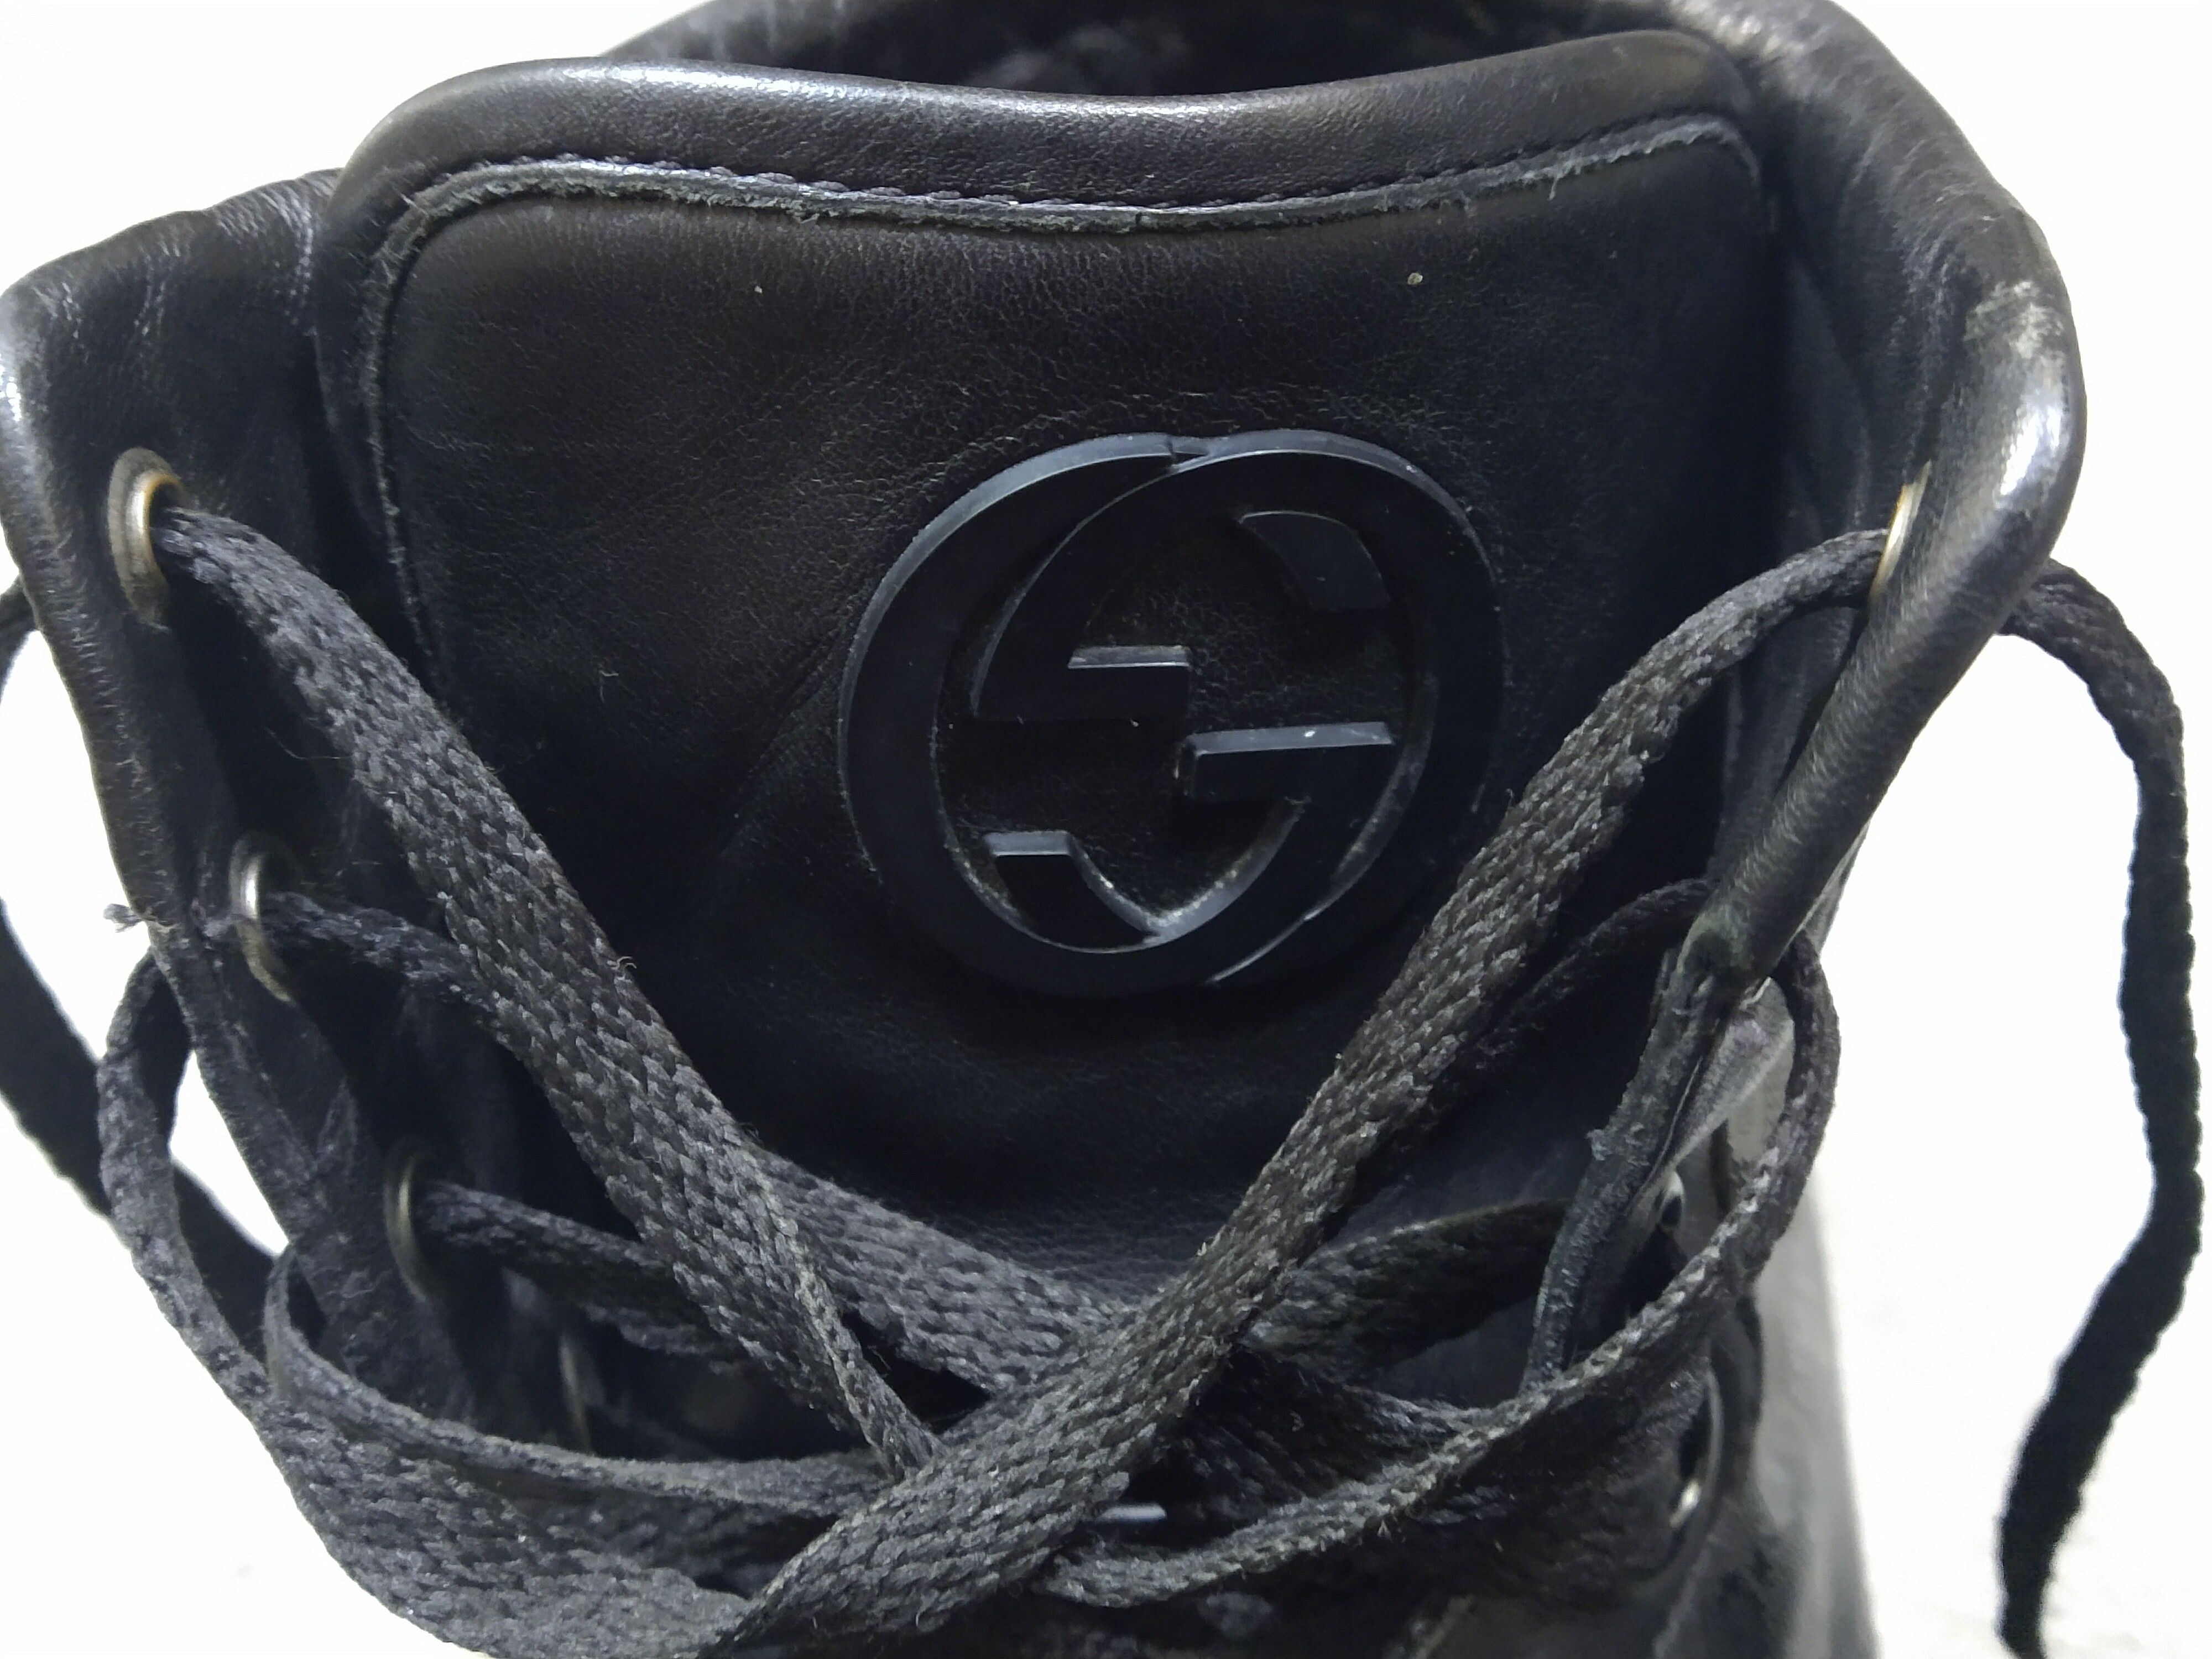 Gucci Gucci High Top Sneakers Black Leather Size 11 Lace Up Size US 11 / EU 44 - 9 Thumbnail